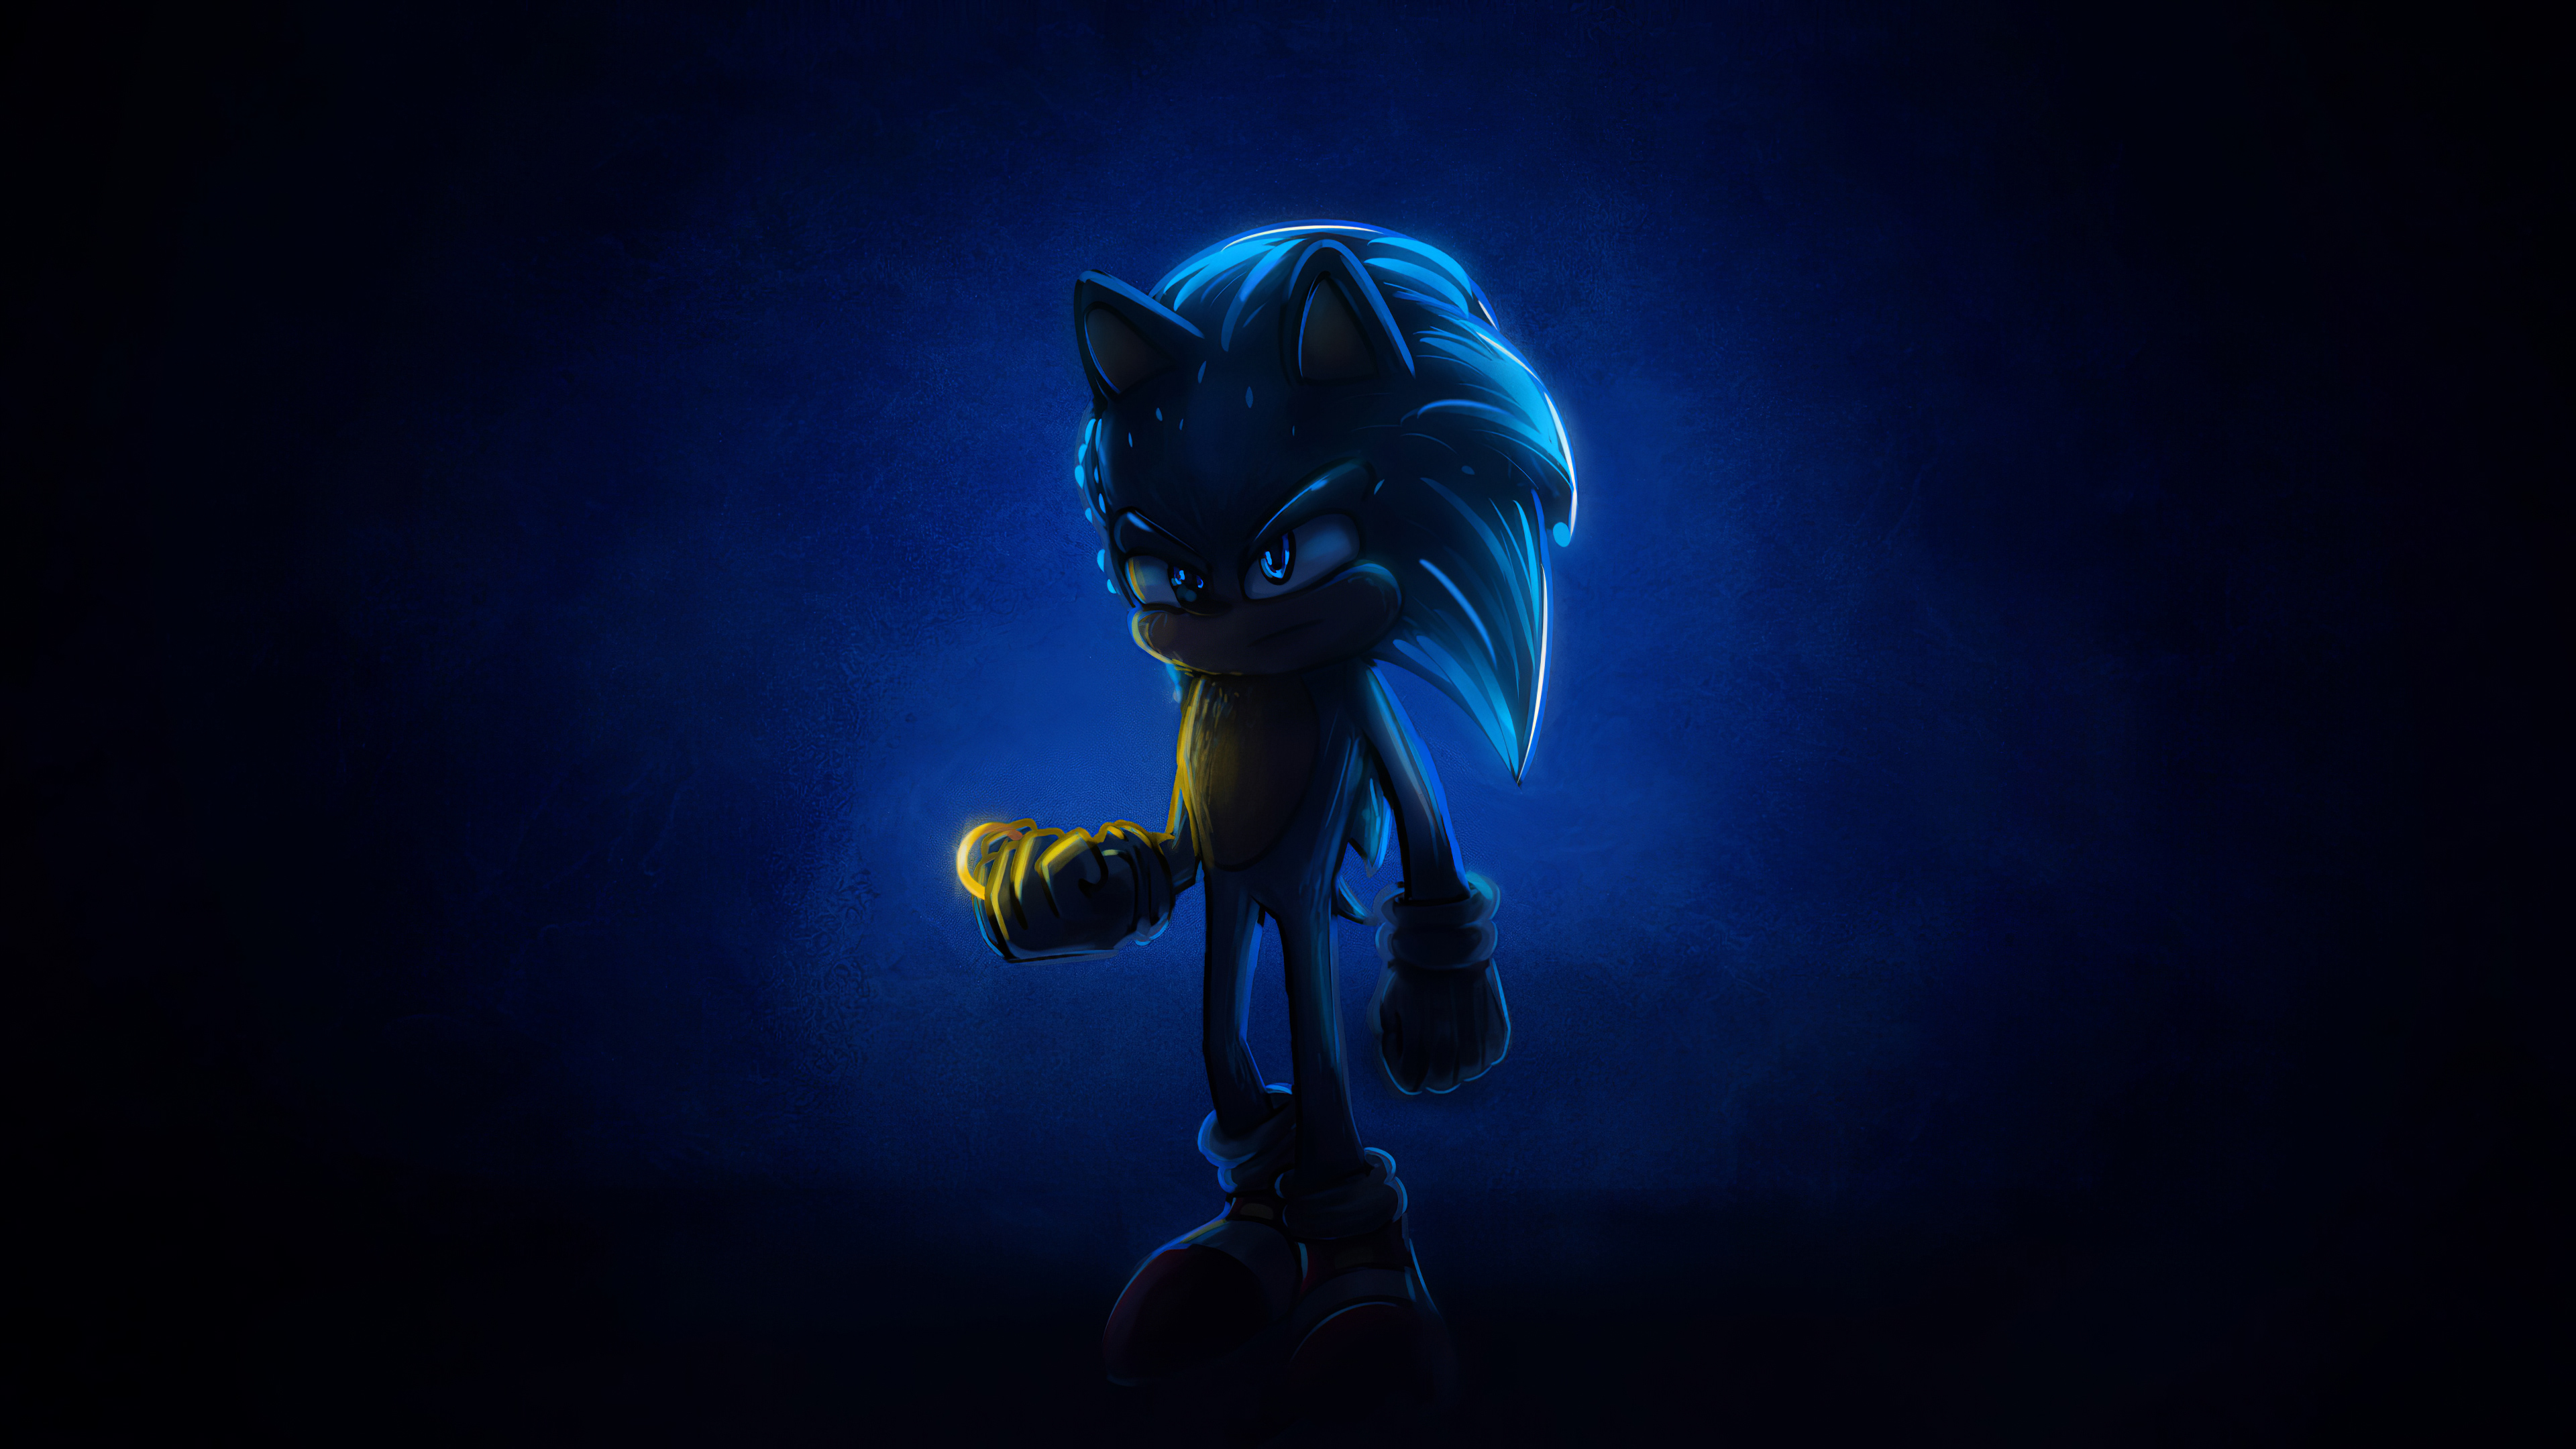 Sonic 4k Artwork Wallpaper Hd Movies 4k Wallpapers Images Photos And Background